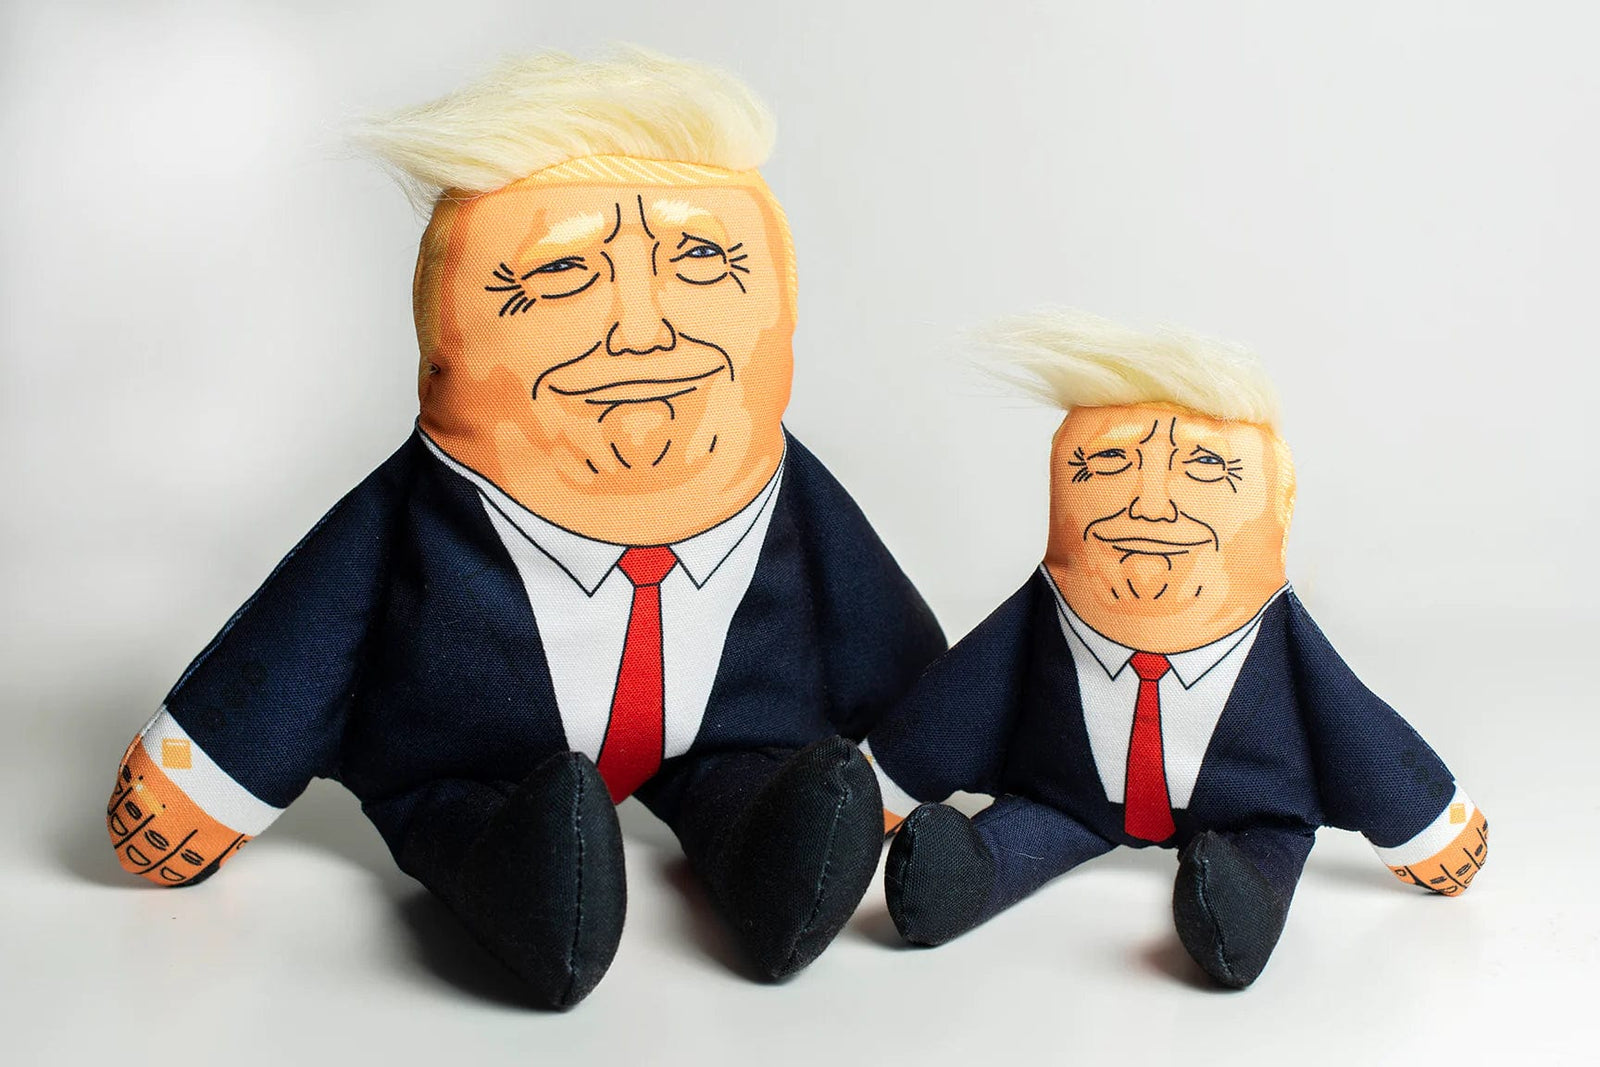 Pet Hates Toys Donald Dog Toy in Small